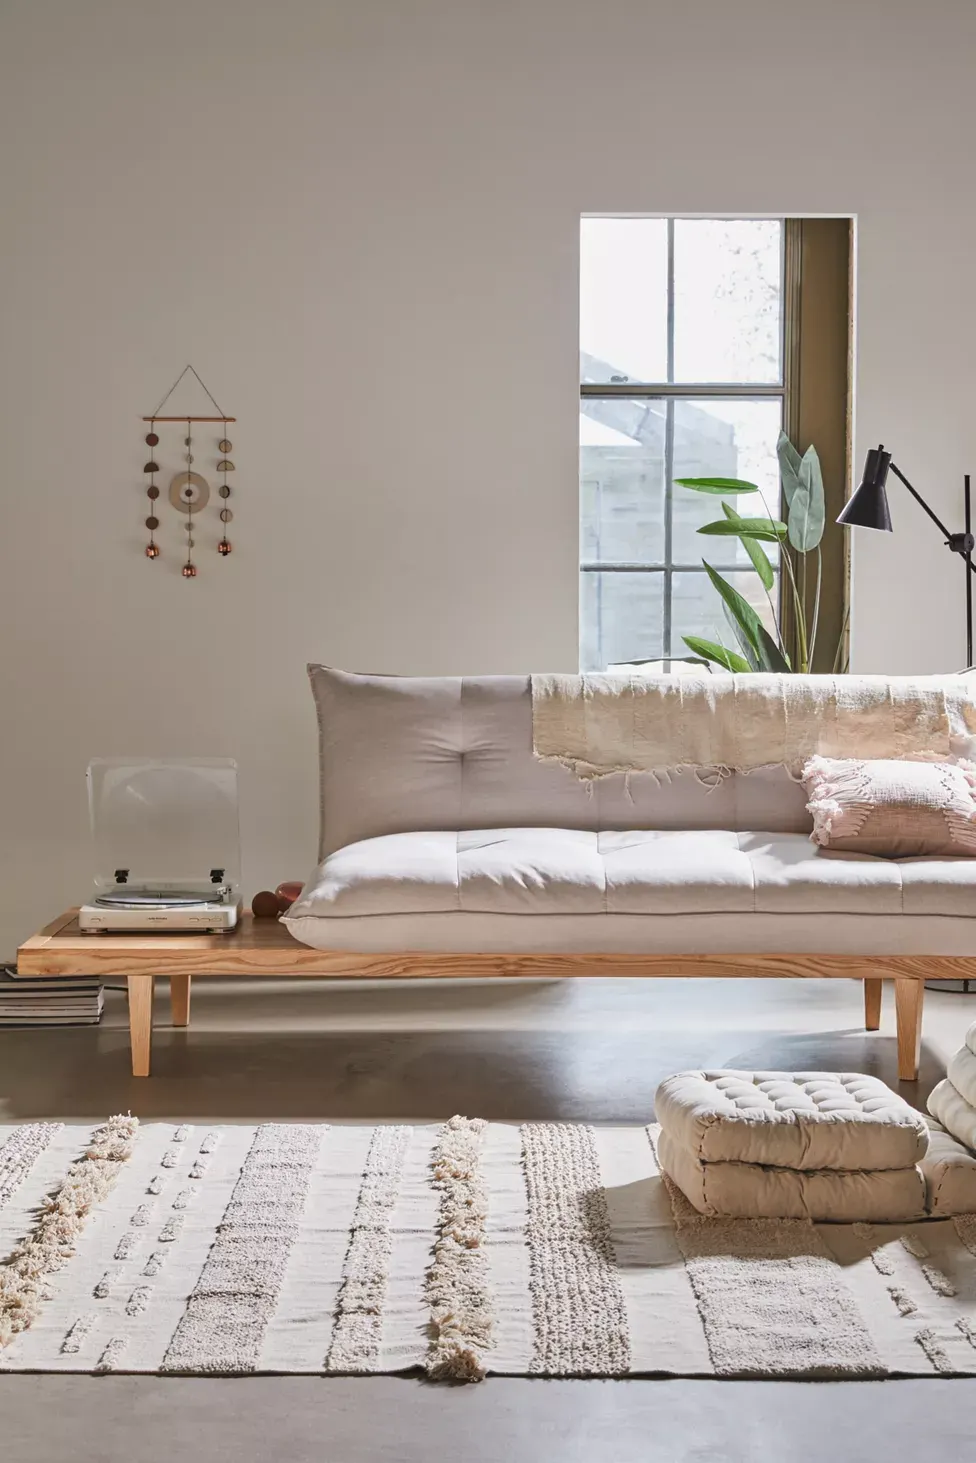 This New Old Sofa Silhouette Could Free Up Space in Your Living